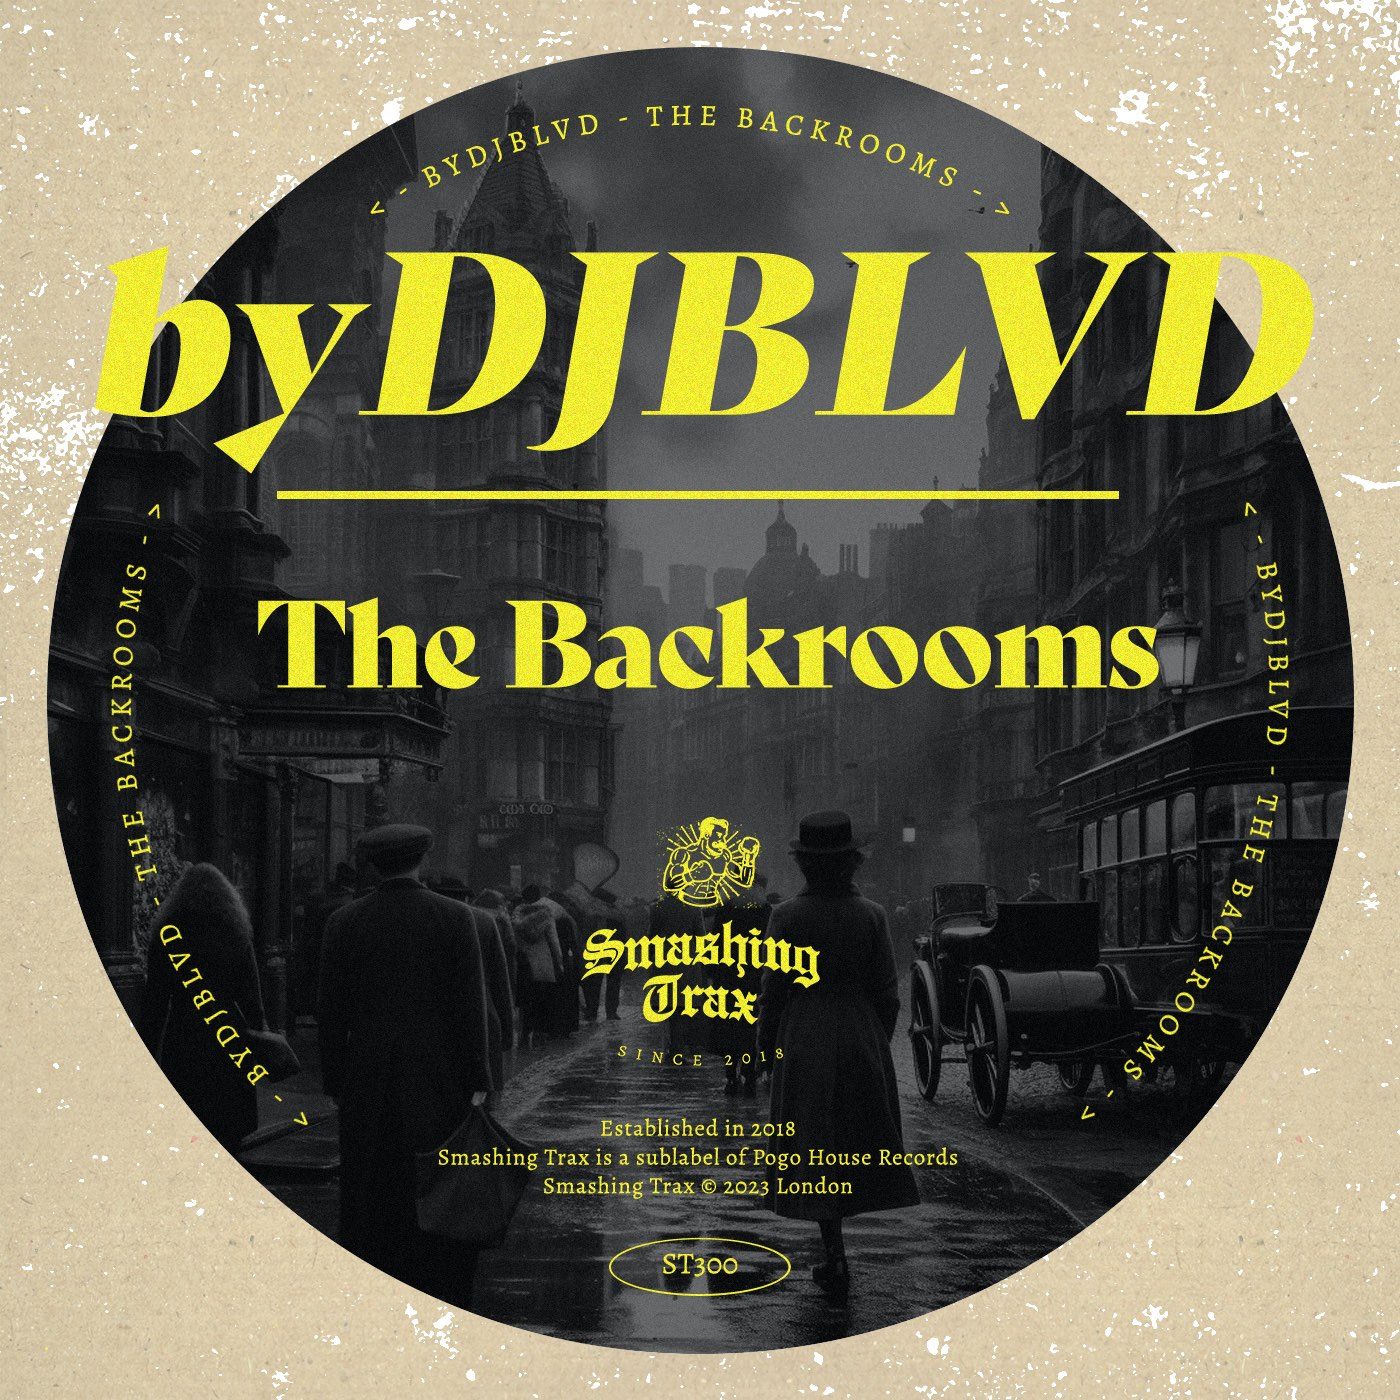 'The Backrooms': the Unmissable New Release From byDJBLVD